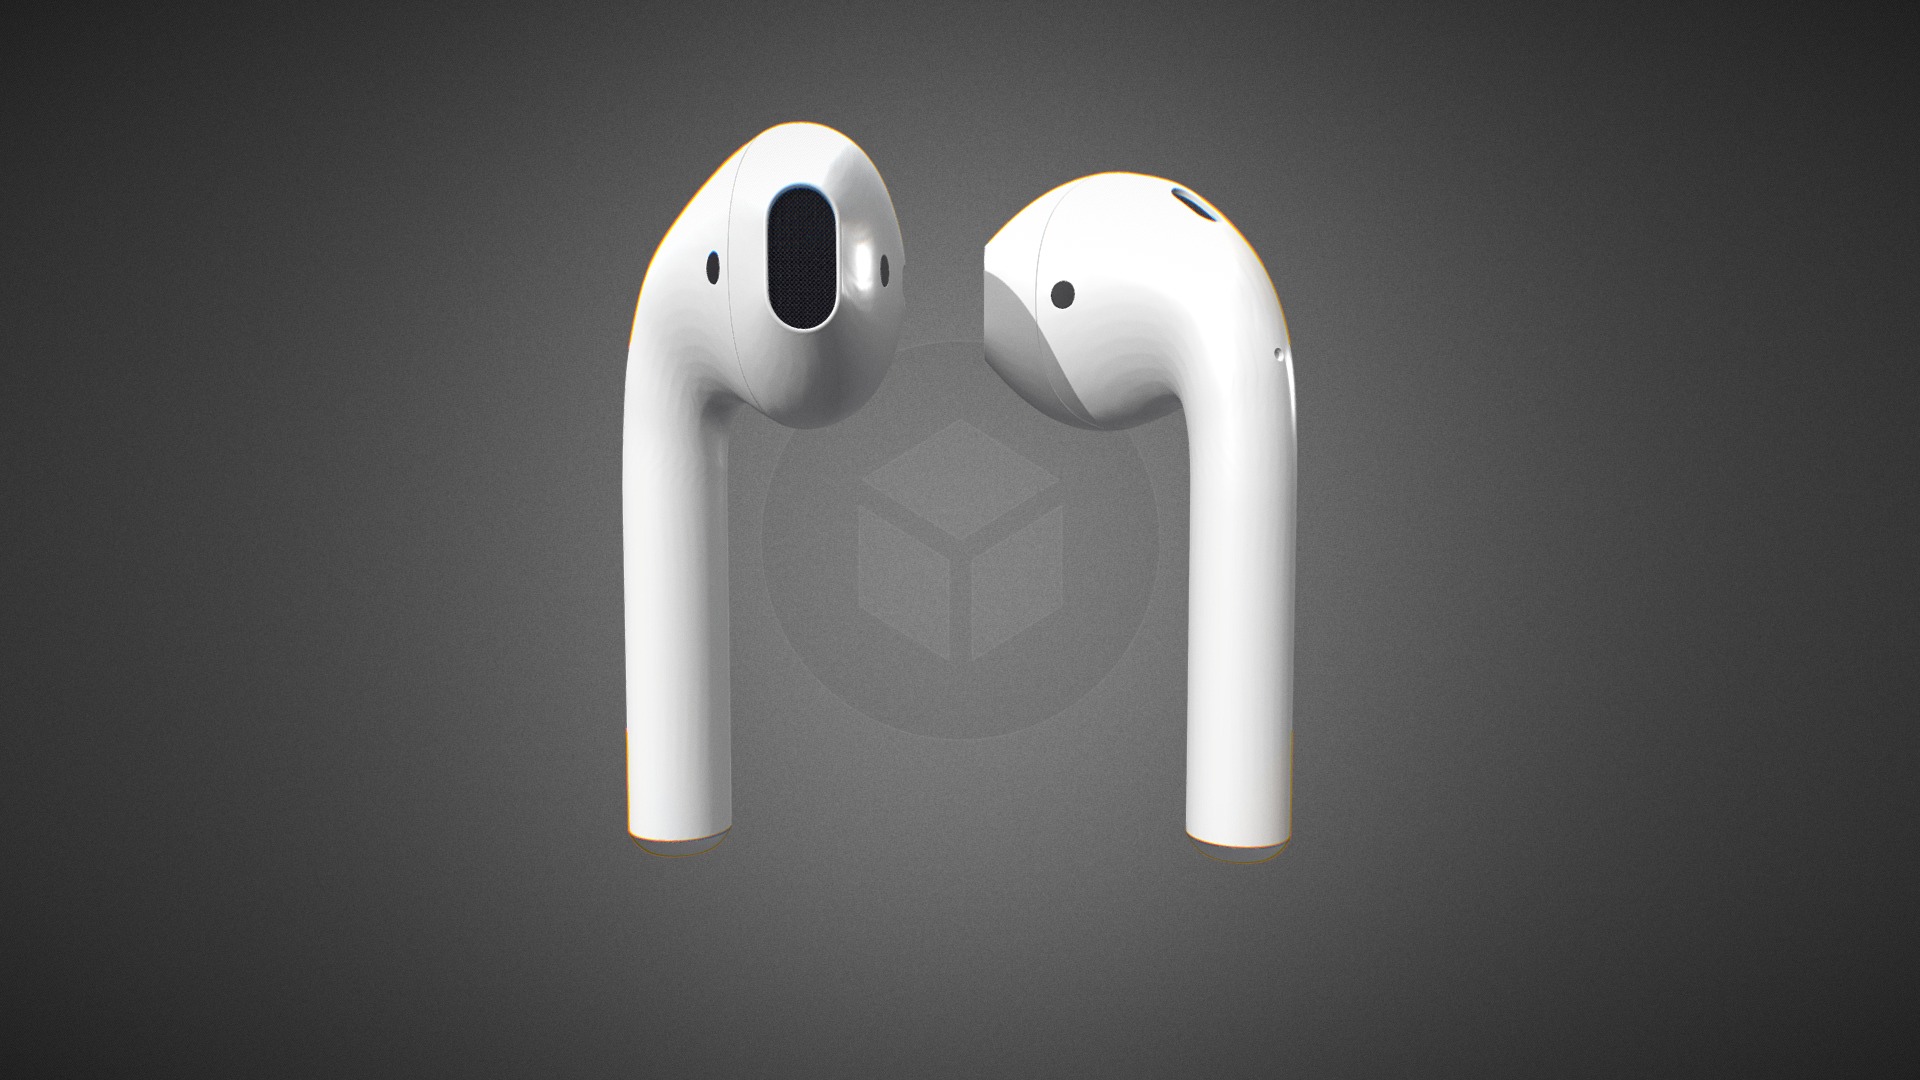 3D model Apple AirPods for Element 3D - This is a 3D model of the Apple AirPods for Element 3D. The 3D model is about a white light bulb.